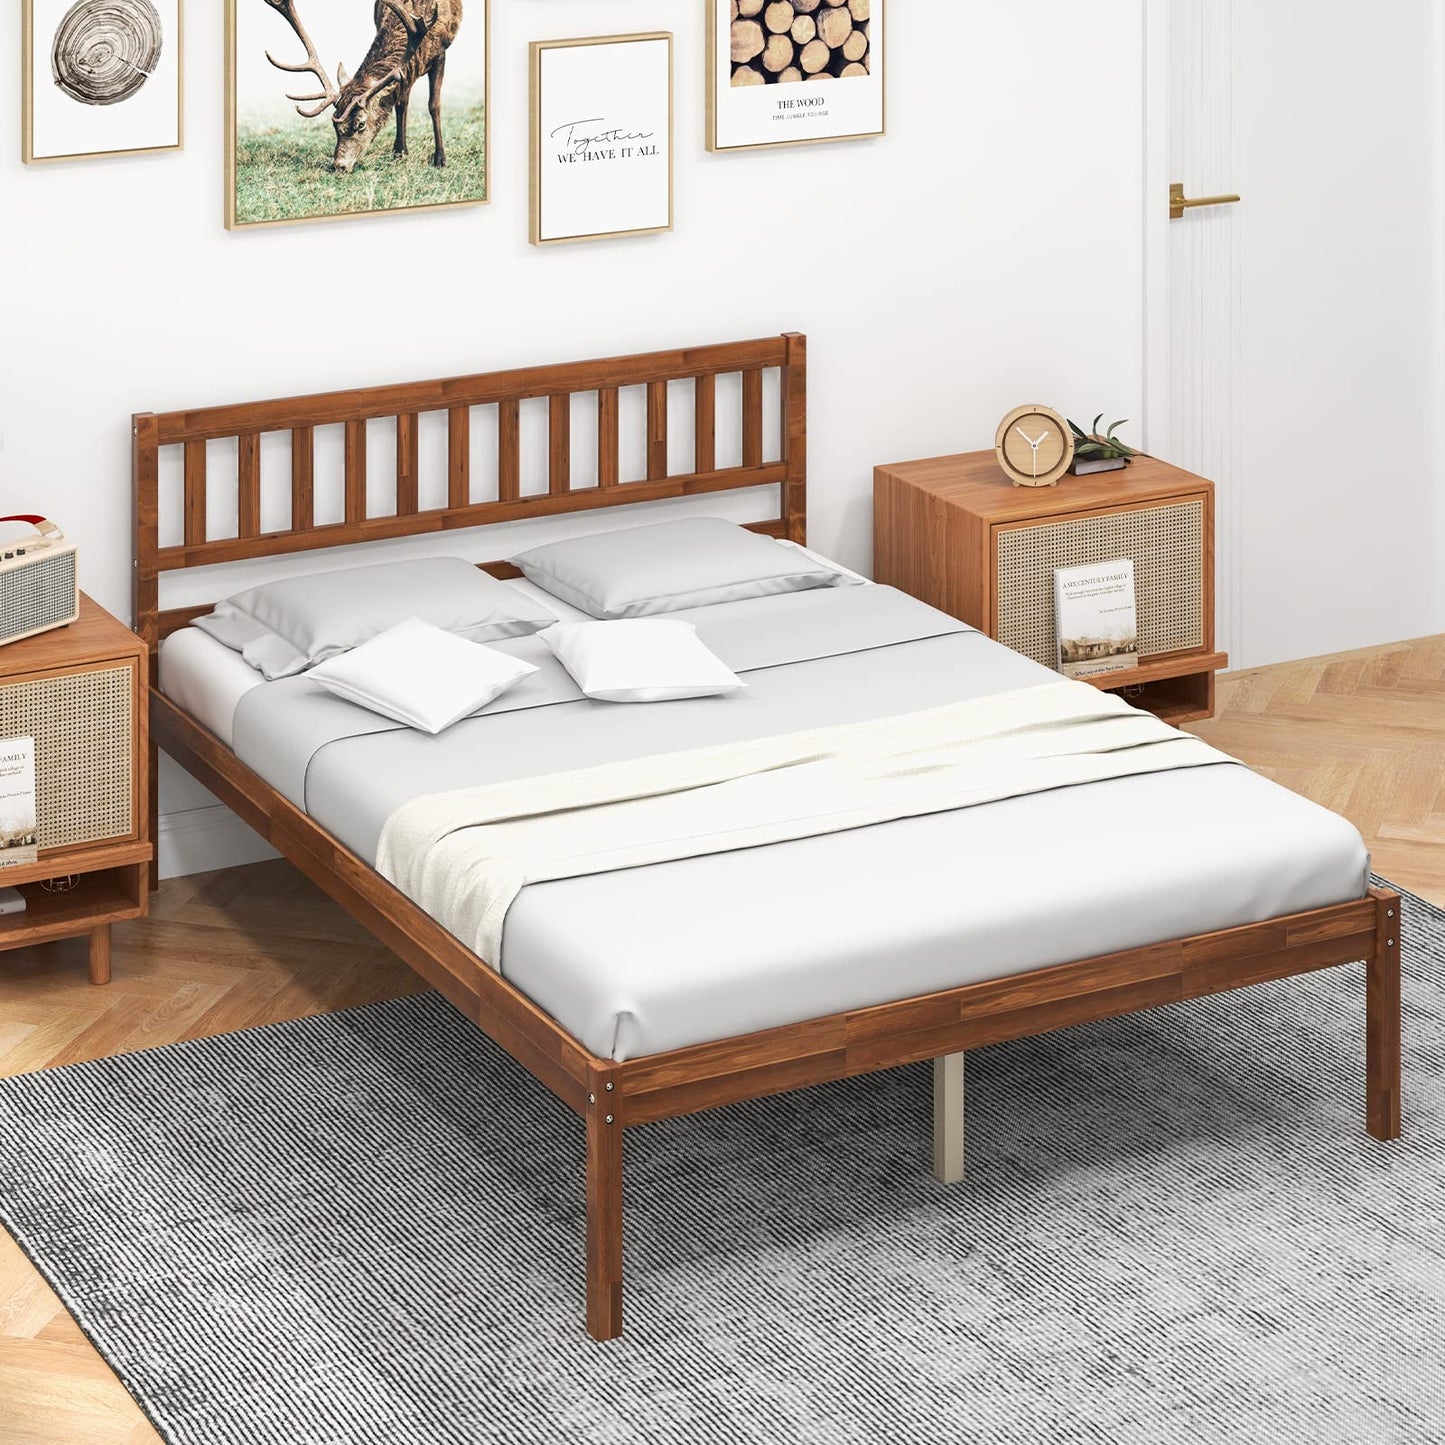 Giantex Wood Full Bed Frame with Headboard, Mid Century Platform Bed with Wood Slat Support, Solid Wood Foundation, 12 Inch Height for Under Bed